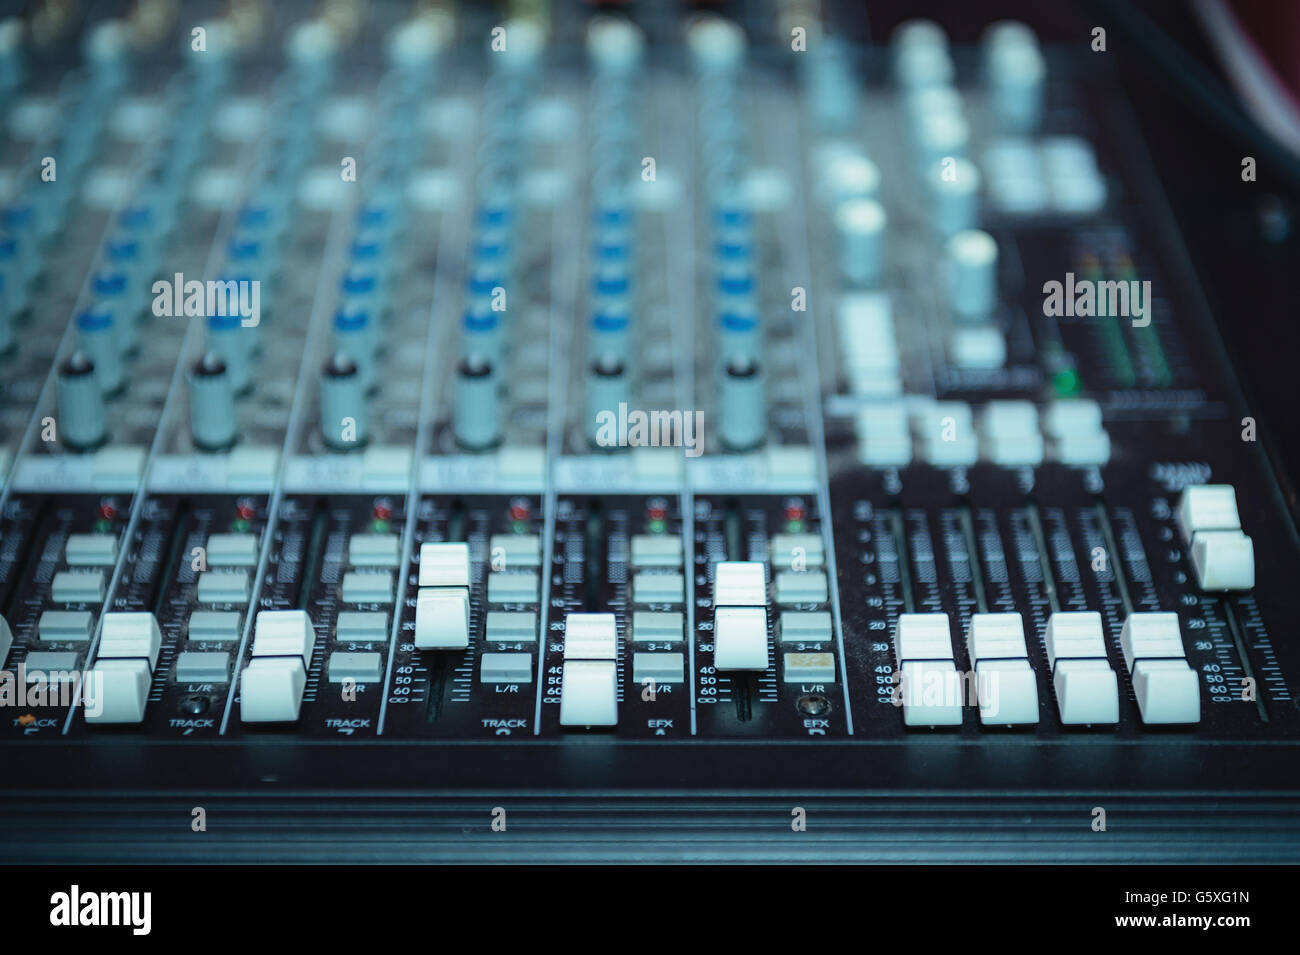 dj turntable, buttons equipment for sound mixer control Stock Photo